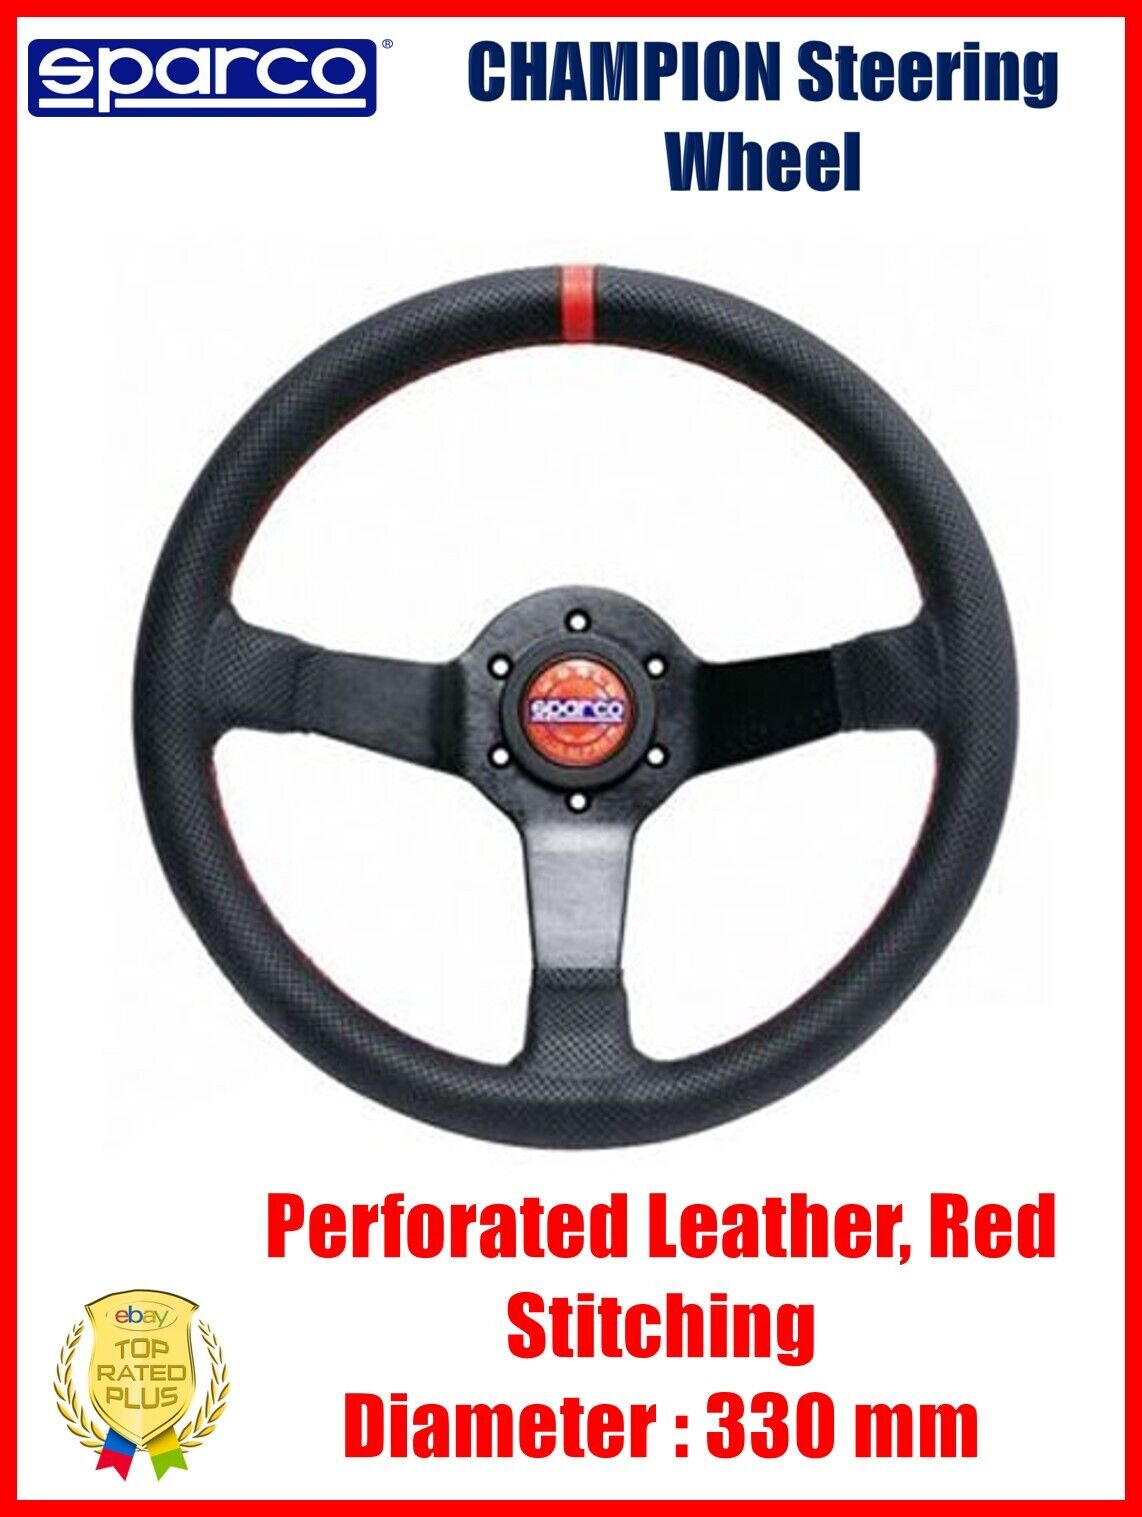 Sparco Champion Steering Wheel Perforated Leather 330 mm Dia 66 mm Dish 015TCHMP